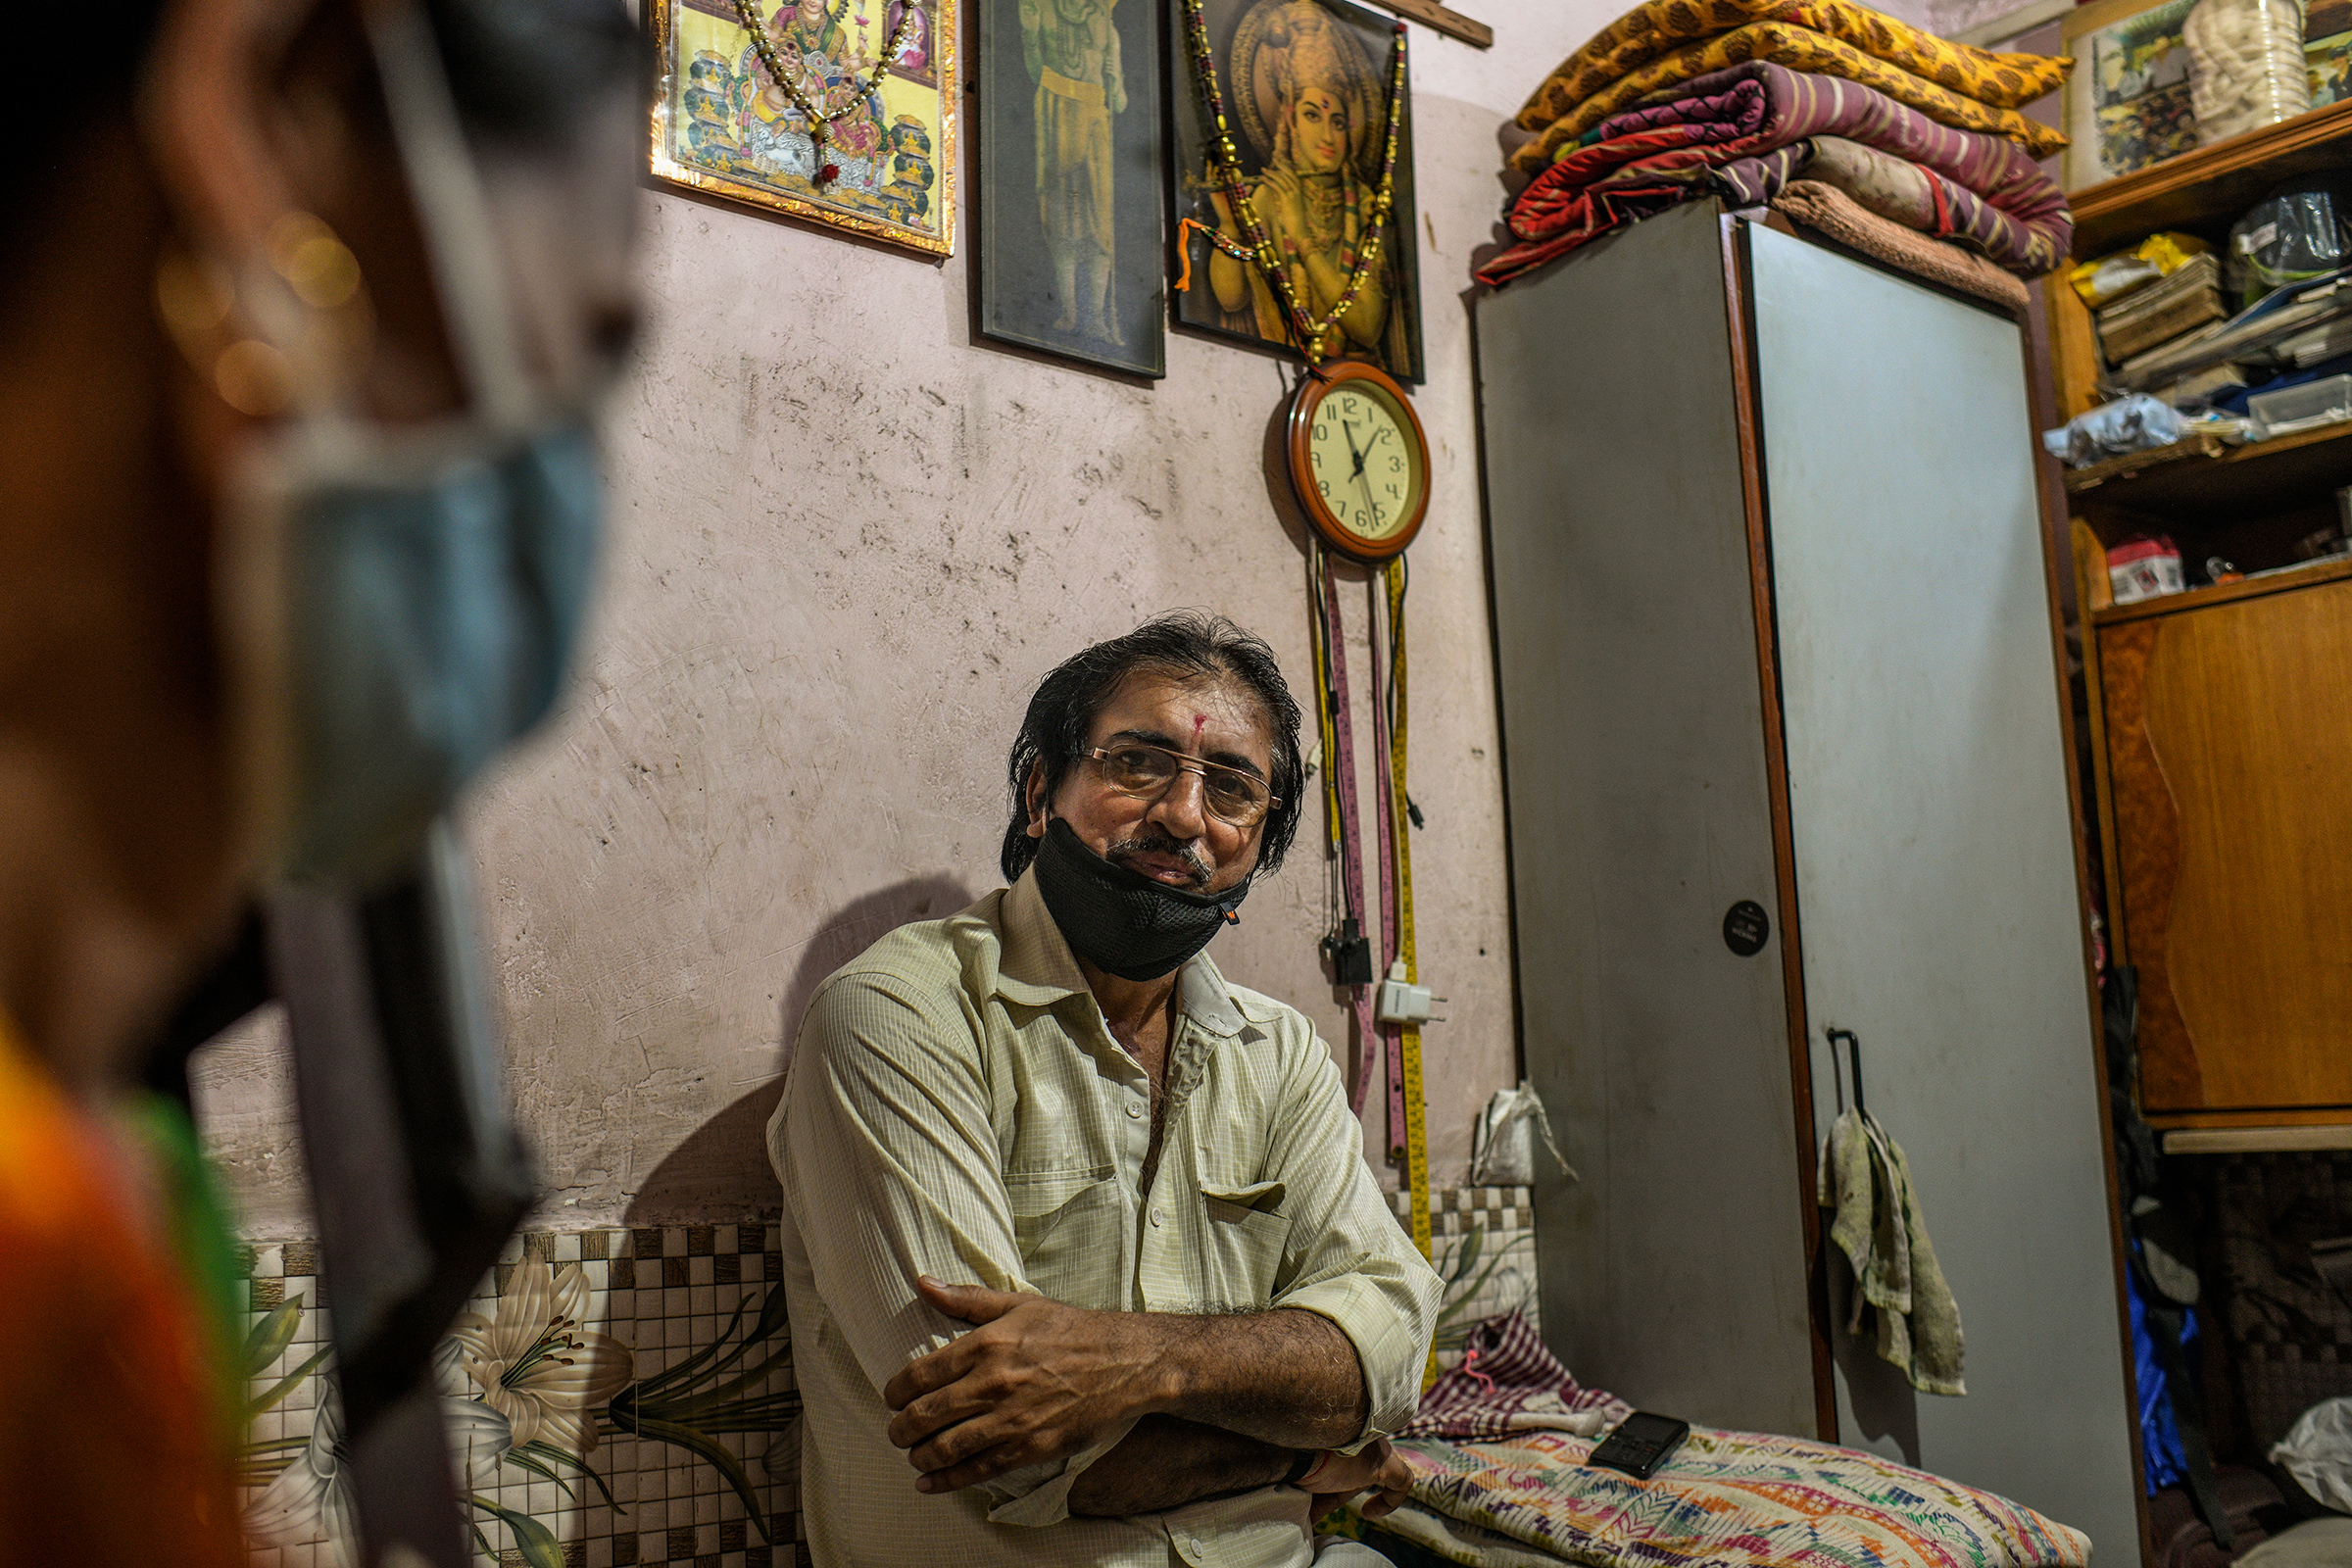 Jayanti Keshav Parmar, a tailor, at his home in Dharavi. His sewing machine sits idle, as no one in the neighborhood can afford to have new clothes stitched this year. (Atul Loke for TIME)